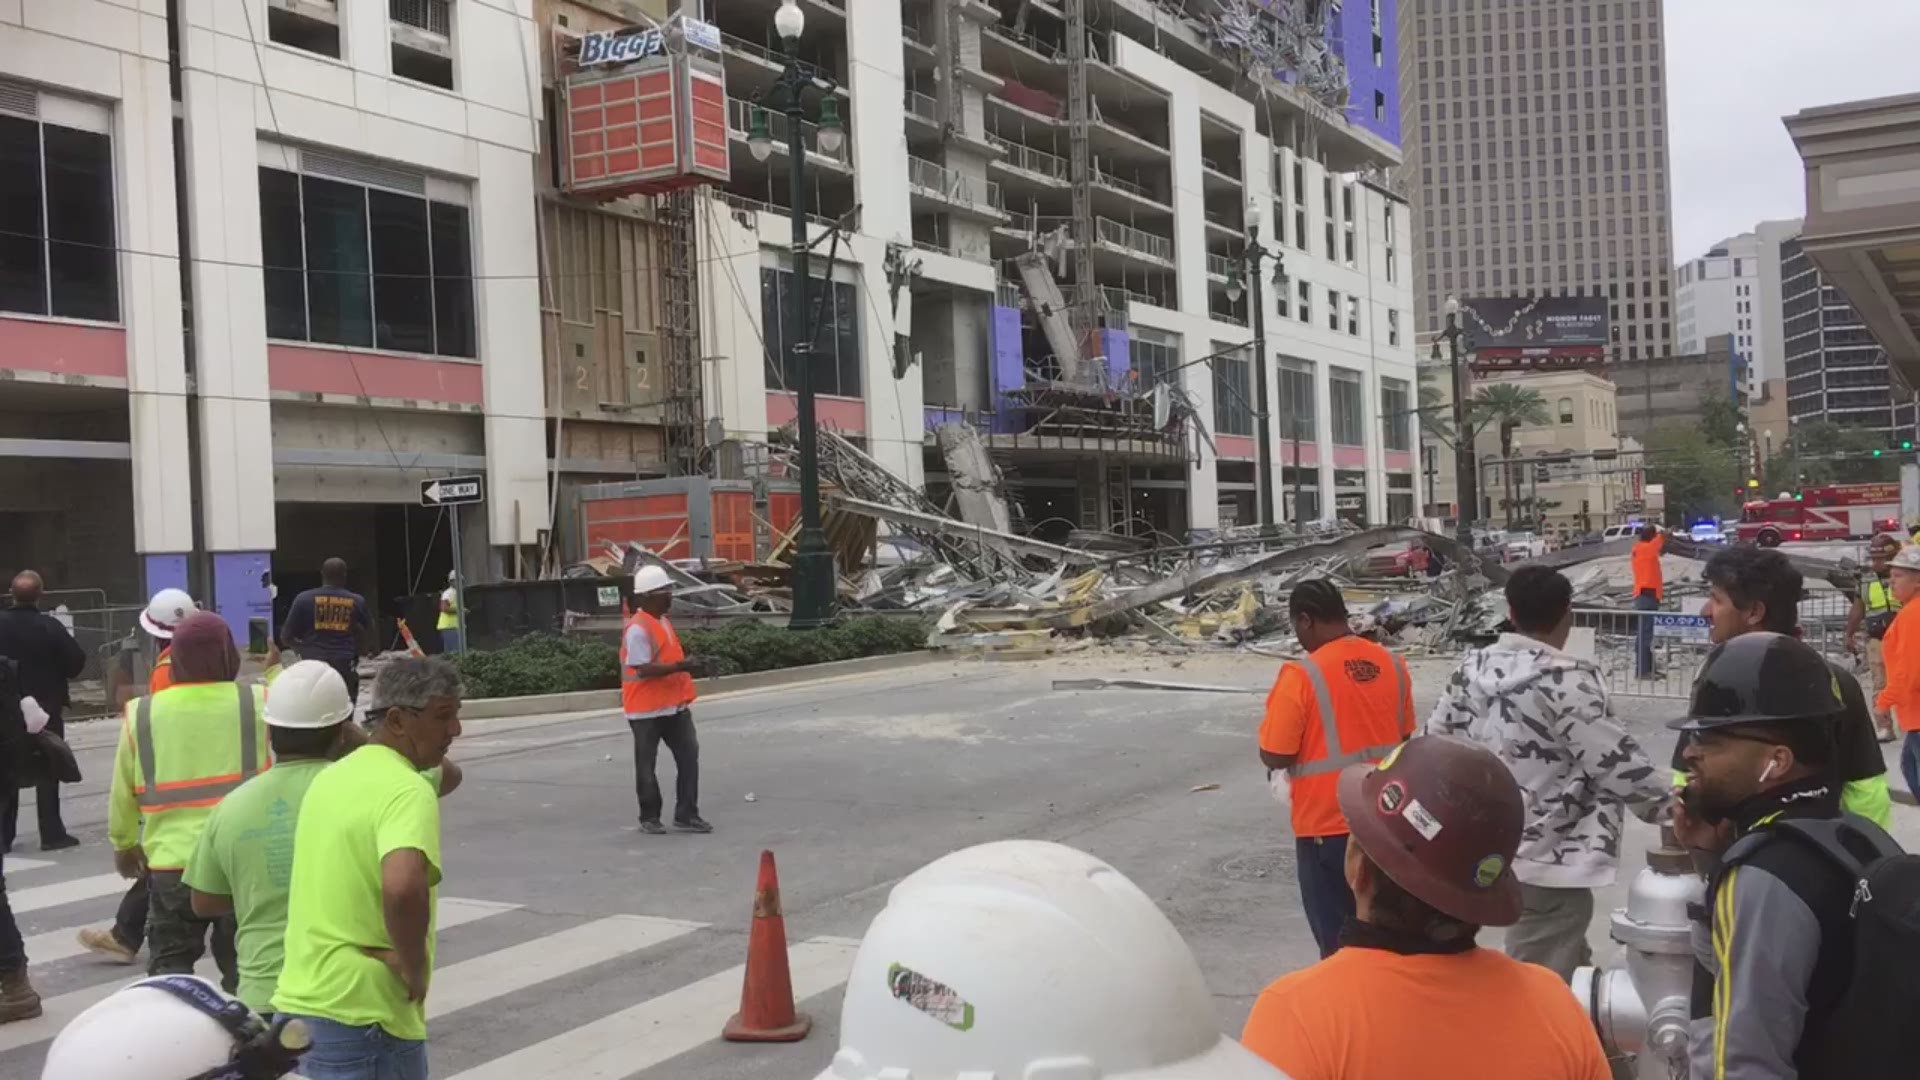 Breaking news from Downtown New Orleans. Video from David Donze.